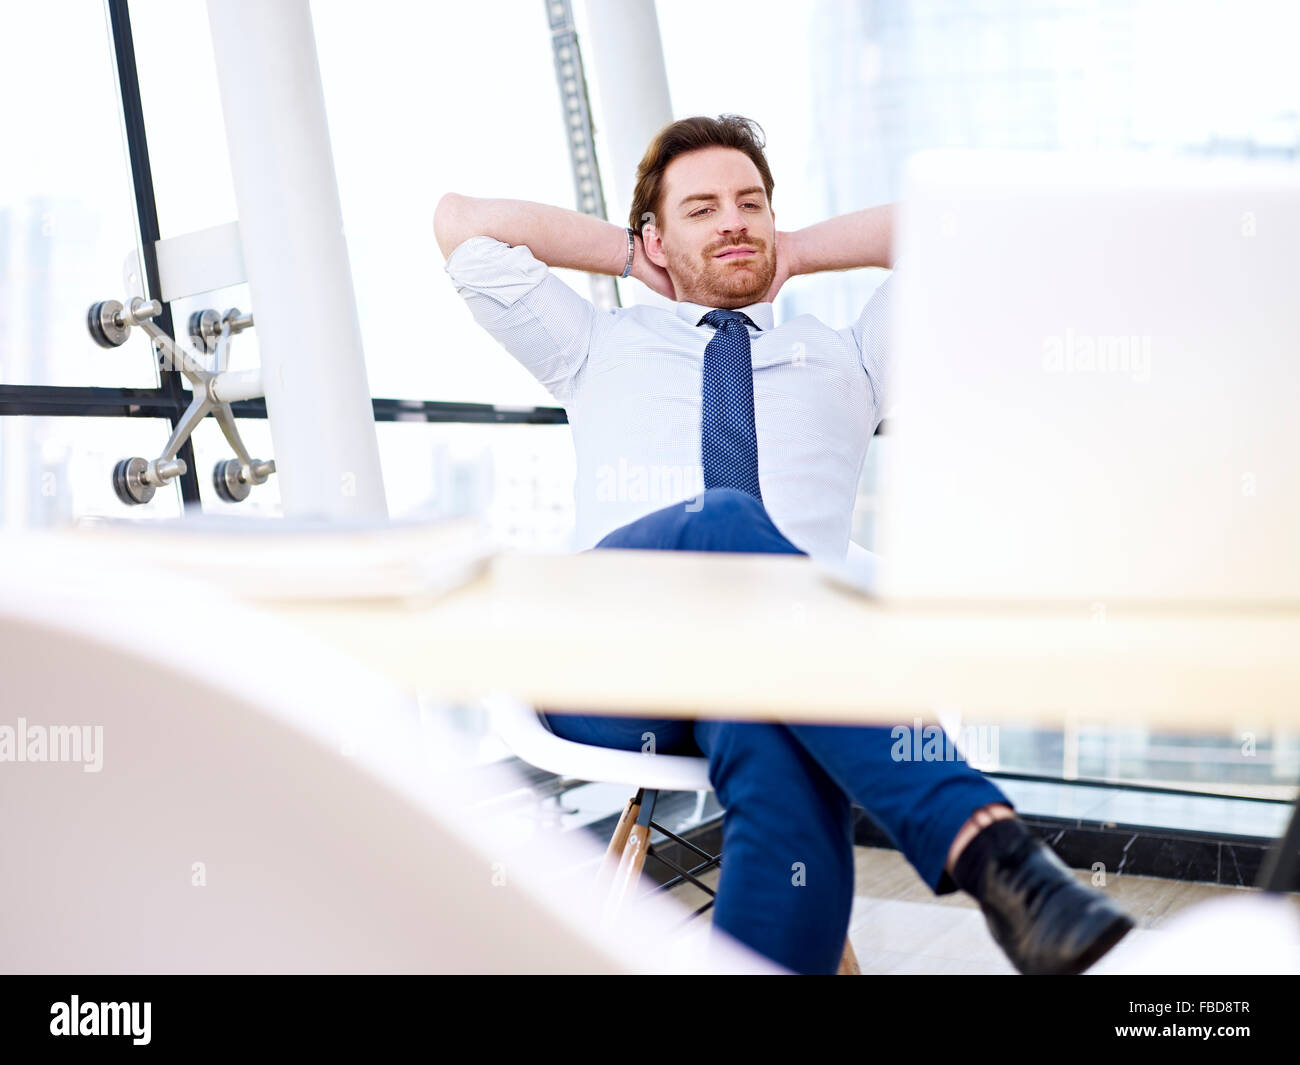 Business man relaxing in office Banque D'Images